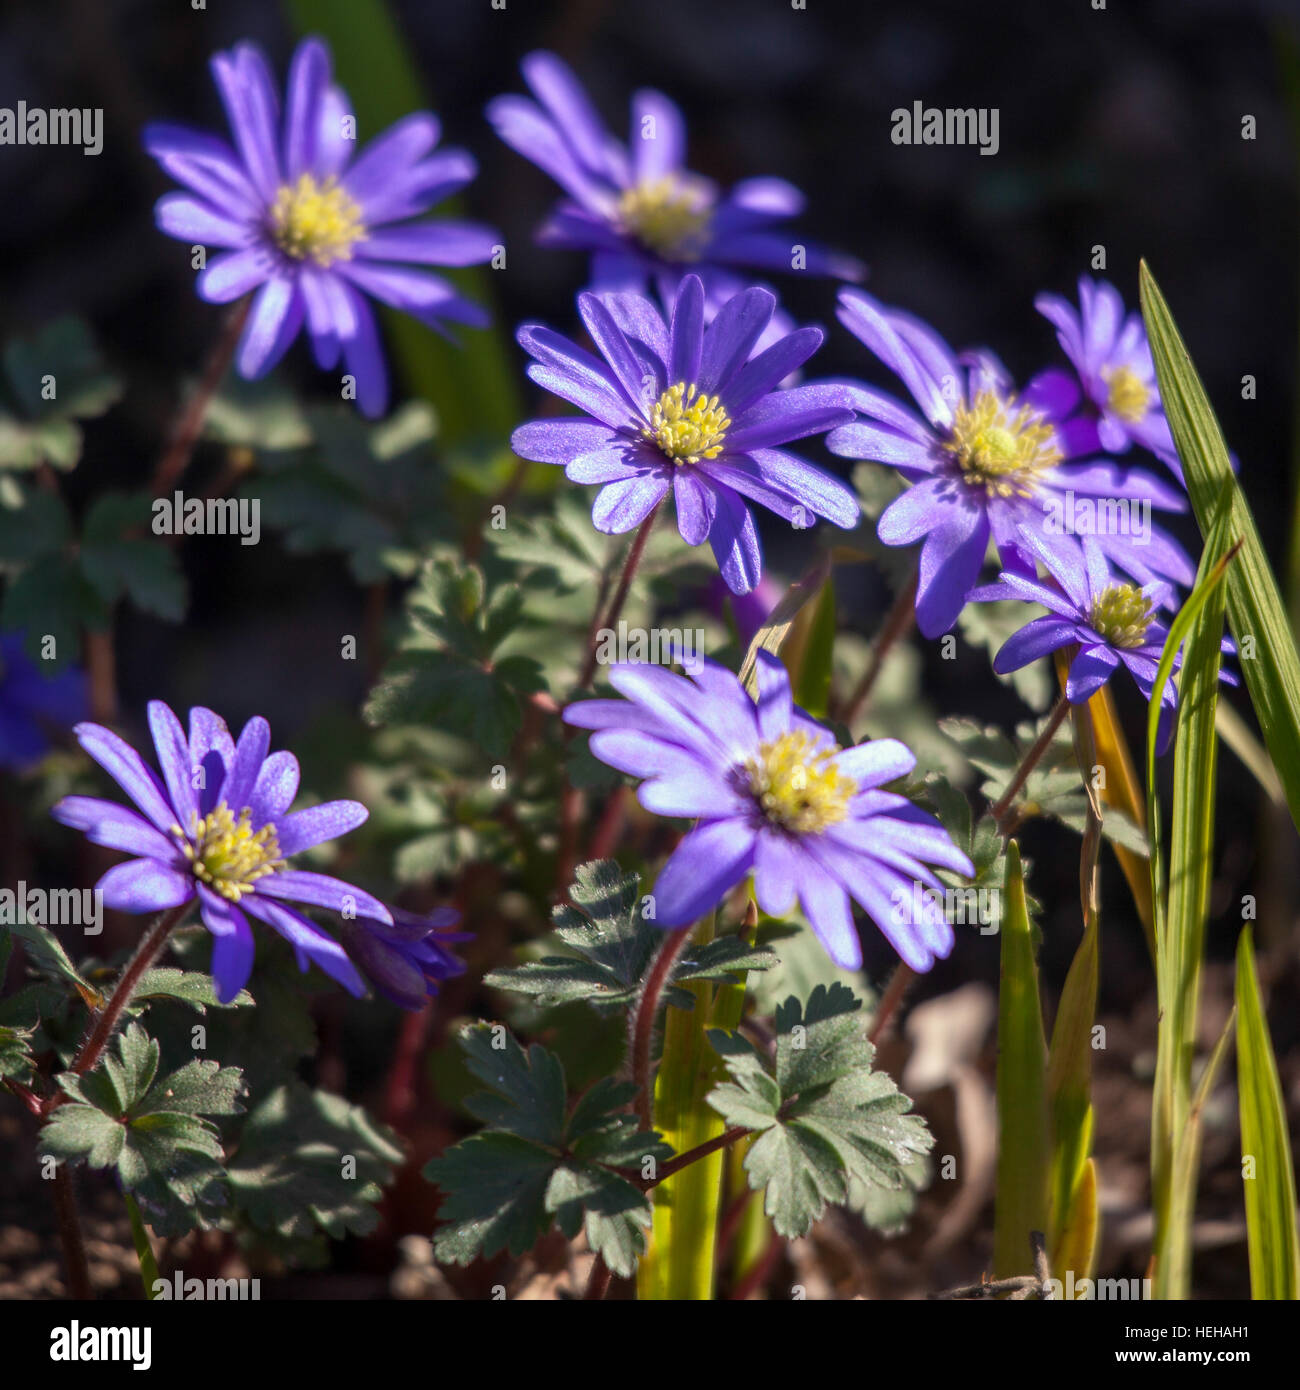 Blue Anemone Flowers with a Yellow Centre Stock Photo